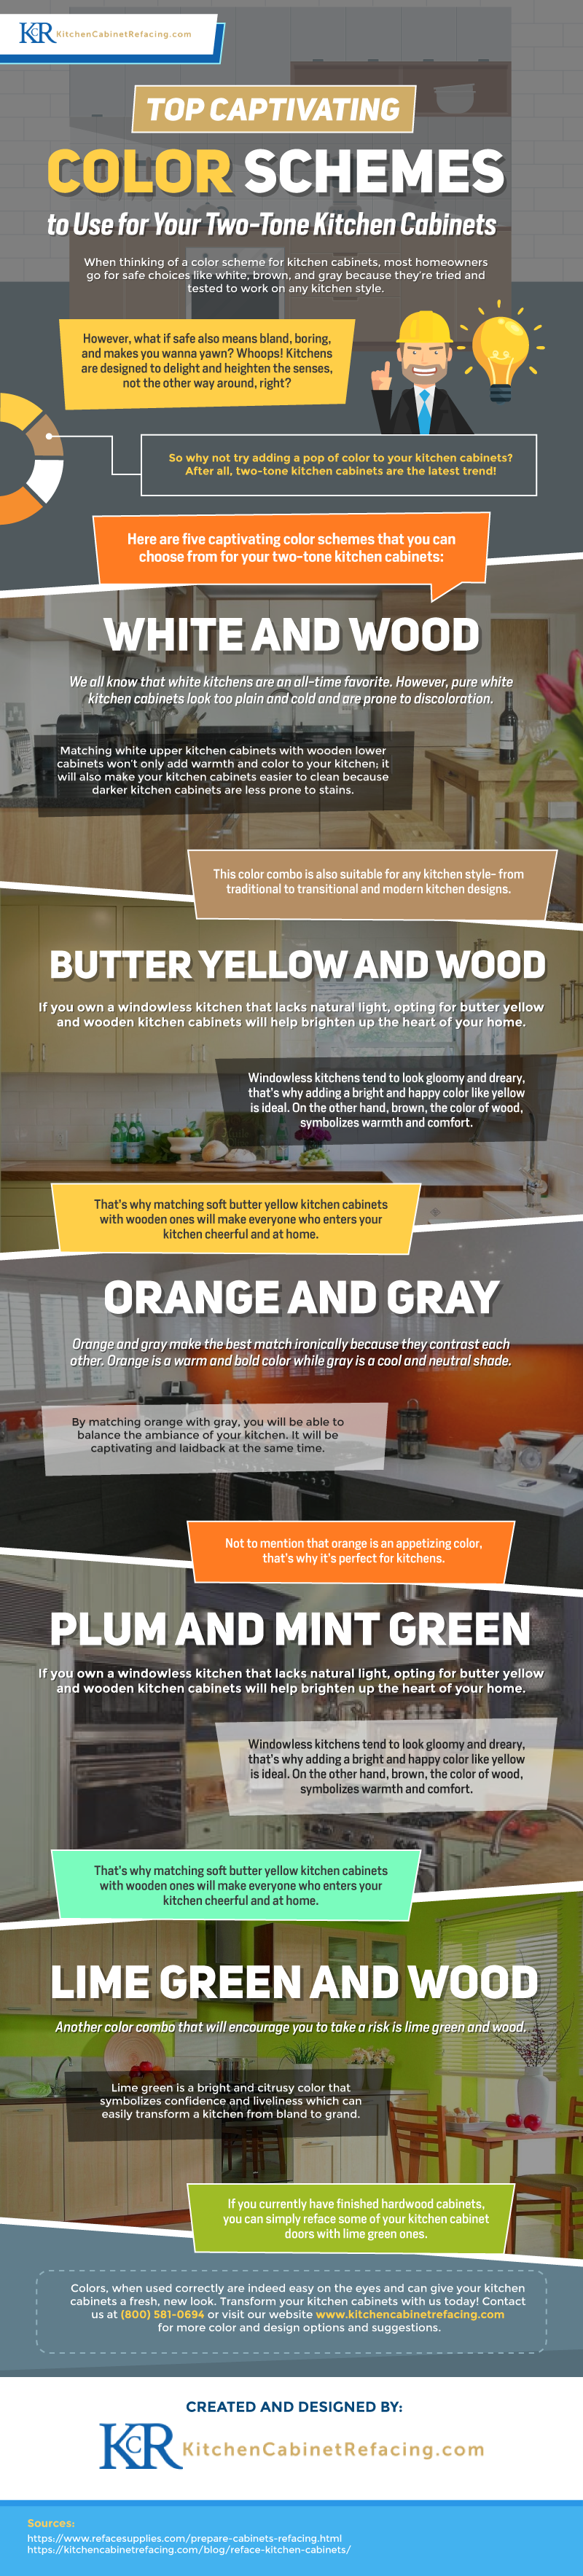 Top Captivating Color Schemes to Use for Your Two-Tone Kitchen Cabinets